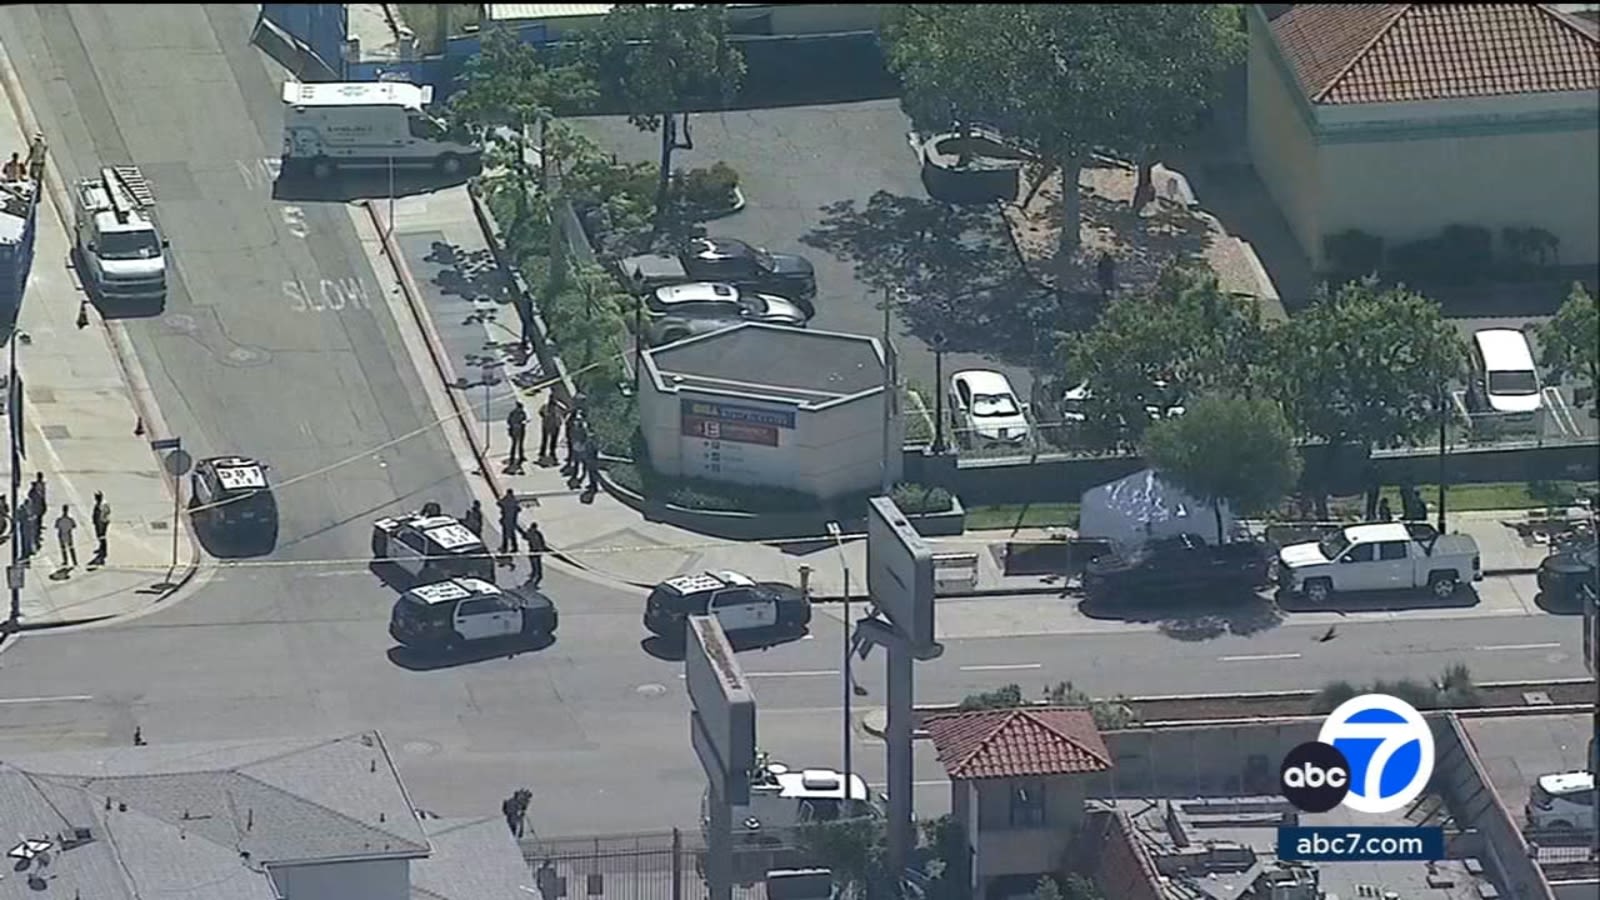 1 person found dead after report of shooting, stabbing near Metro station in East Hollywood